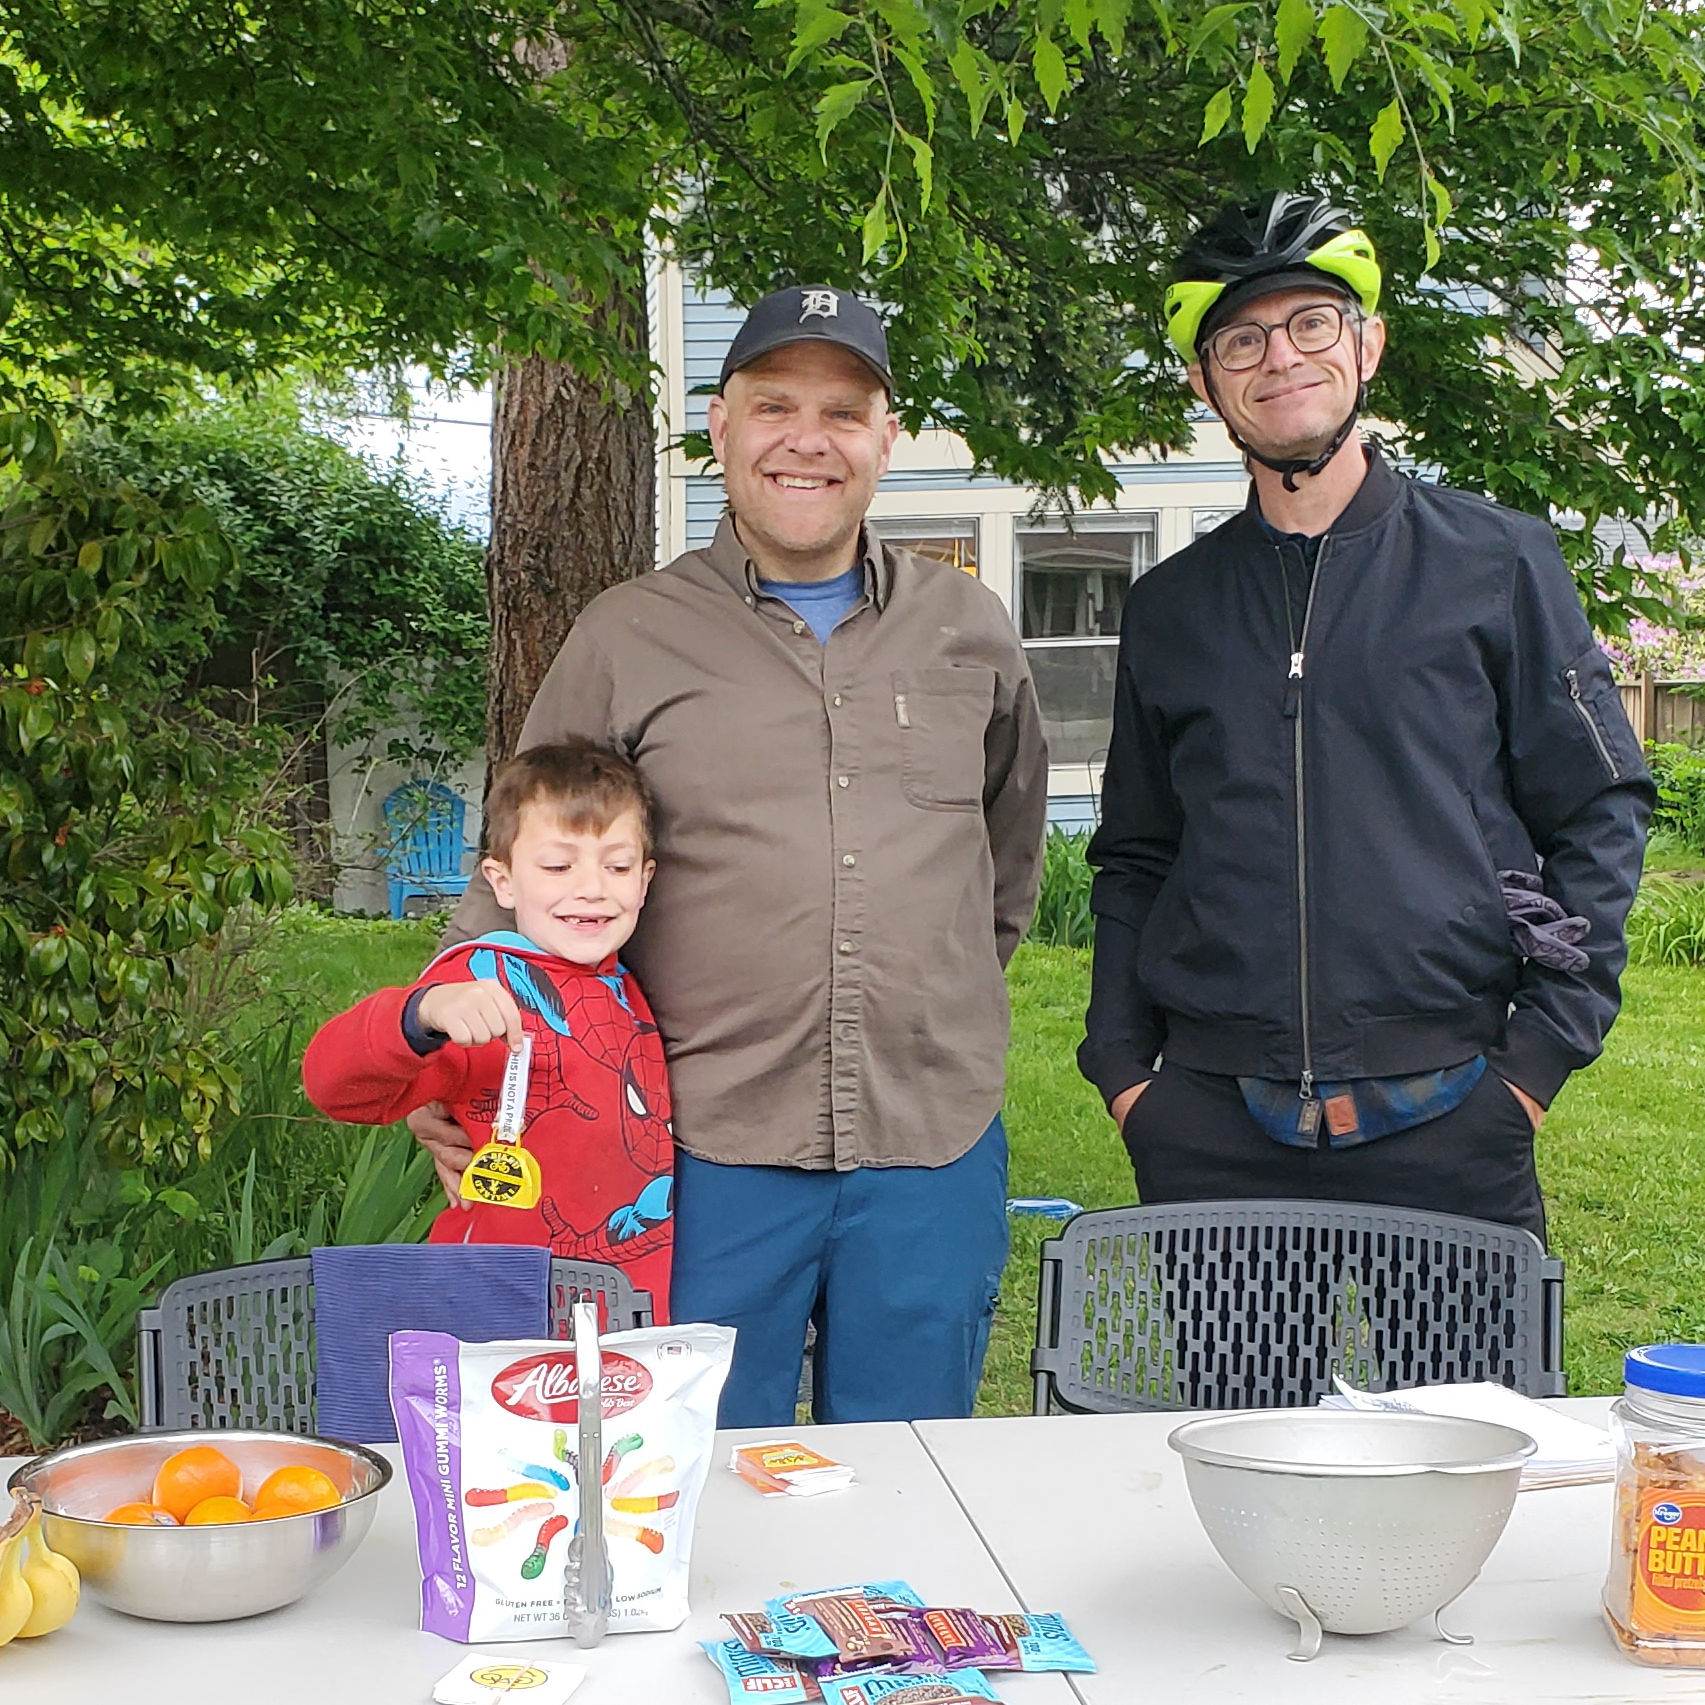 Two adults and one child standing behind a table with snacks.